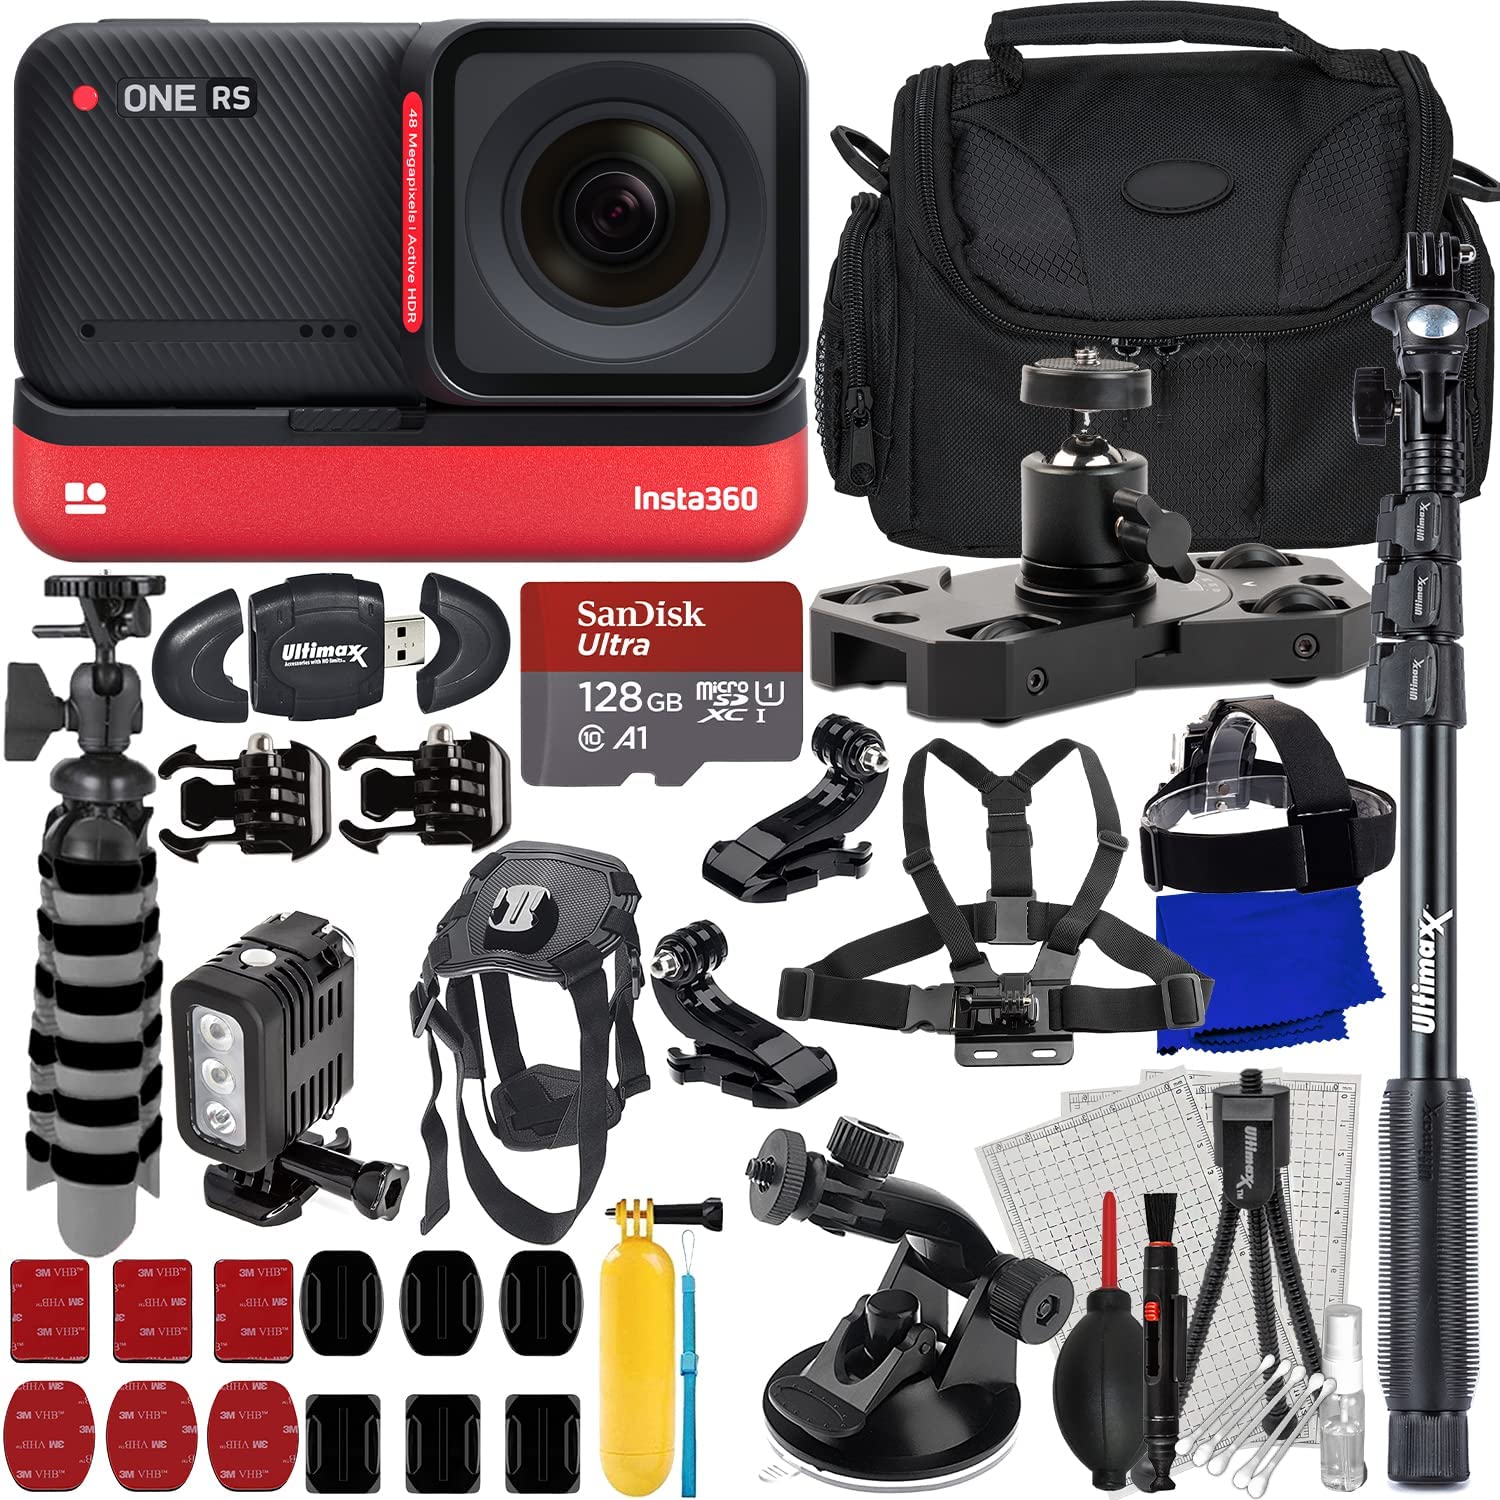 Insta360 ONE RS 4K Edition + SanDisk 128GB Ultra MicroSDXC, Underwater LED Light, Mini Metal Camera Dolly, Action Cam Harness for Pets, Chest & Head Straps w/Action Cam Mounts &Much More(34pc Bundle)